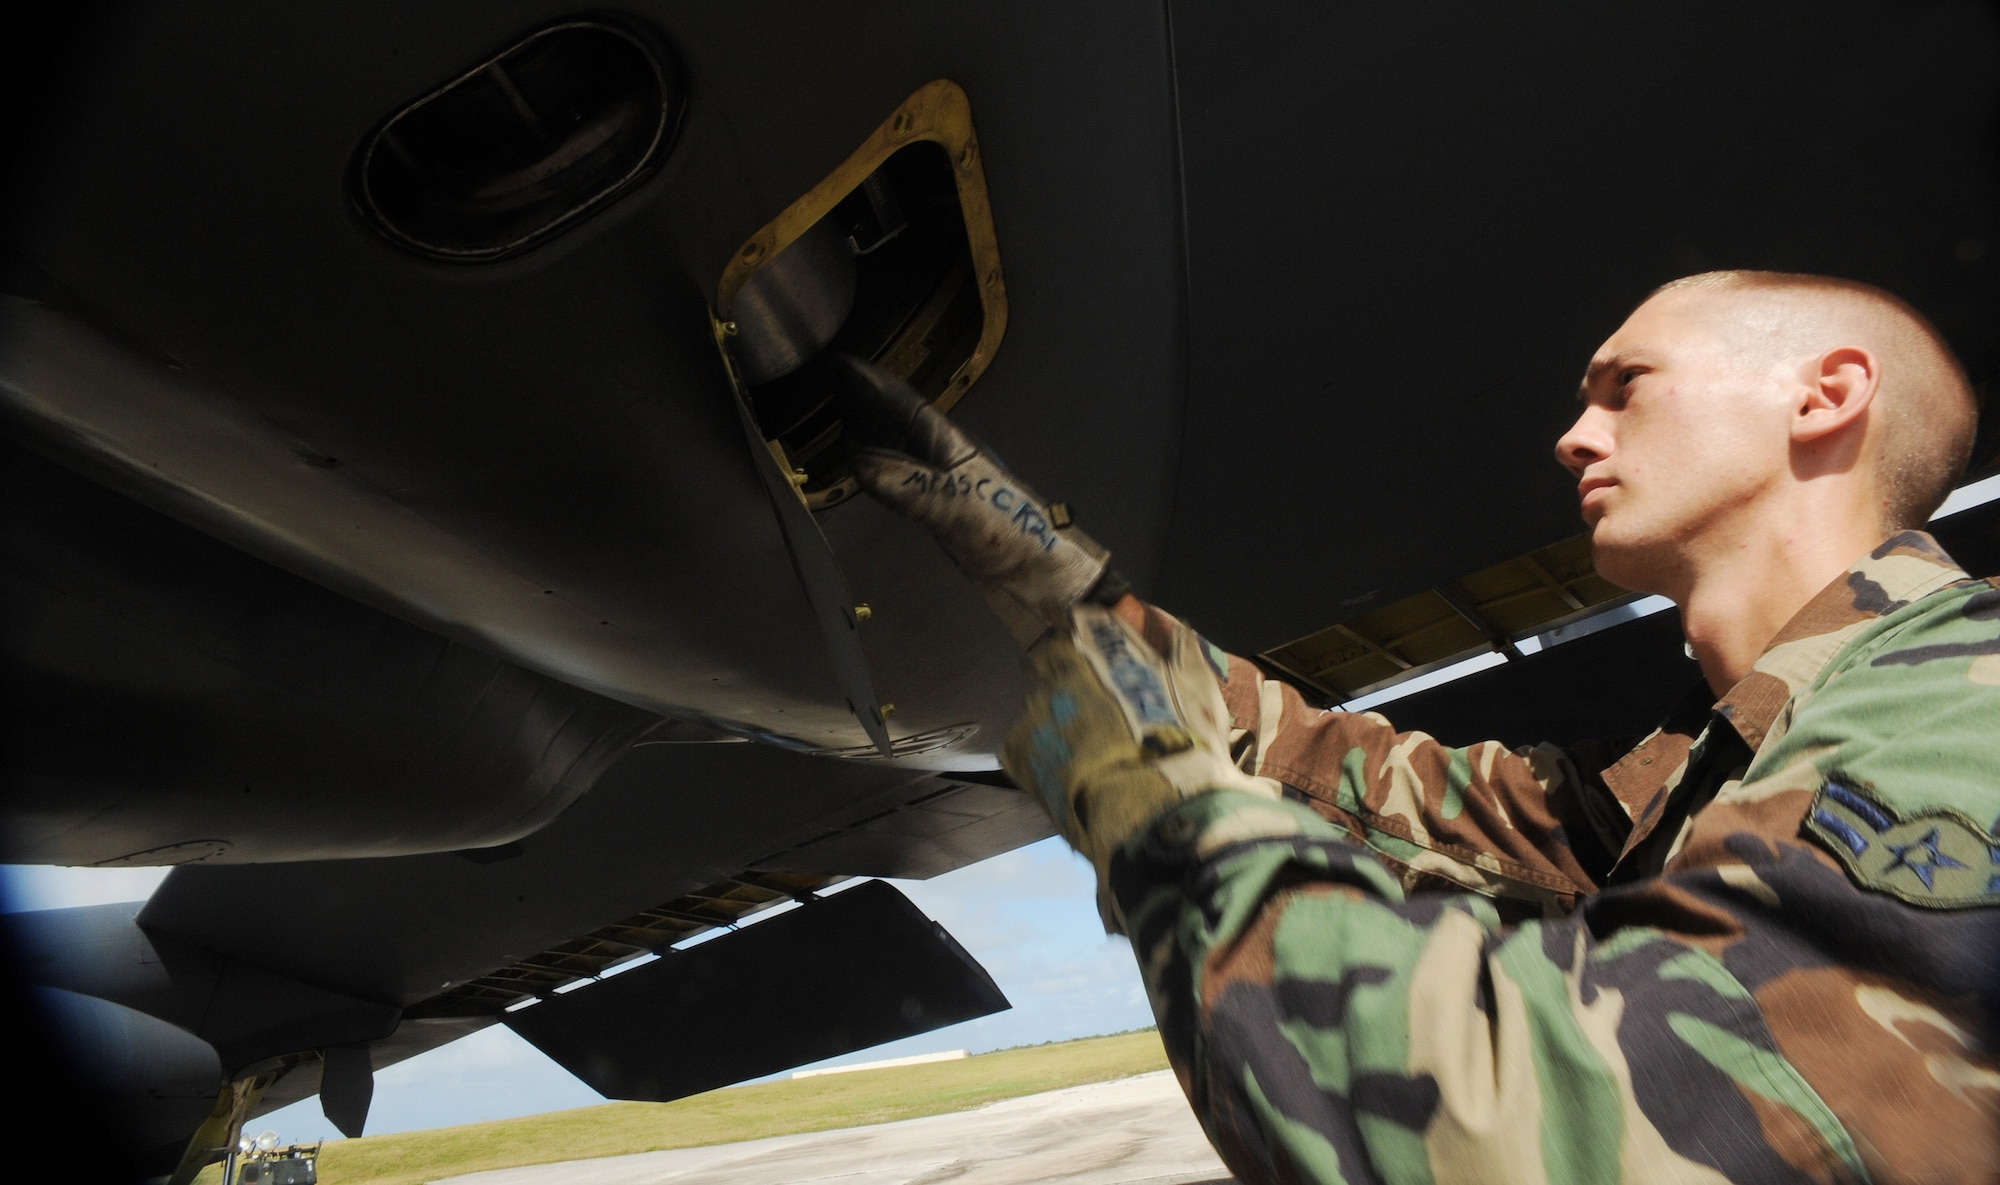 Airman 1st Class Michael Brand, 36th Expeditionary Aircraft Maintenance Squadron crew chief, loads a "quick start" cartridge on a B-52 Stratofortress before a local training mission Dec. 30 at Andersen Air Force Base, Guam. Throughout the month of December, deployed Airmen have been launching aircraft by a method known as cartridge starts, or "Cart-Starts." During these launches, a small-controlled explosive is inserted into two of the eight engines located on the B-52 providing a rapid response launch capability. Airman Brand is deployed from Minot AFB, N.D. (U.S. Air Force photo/Master Sgt. Kevin J. Gruenwald)